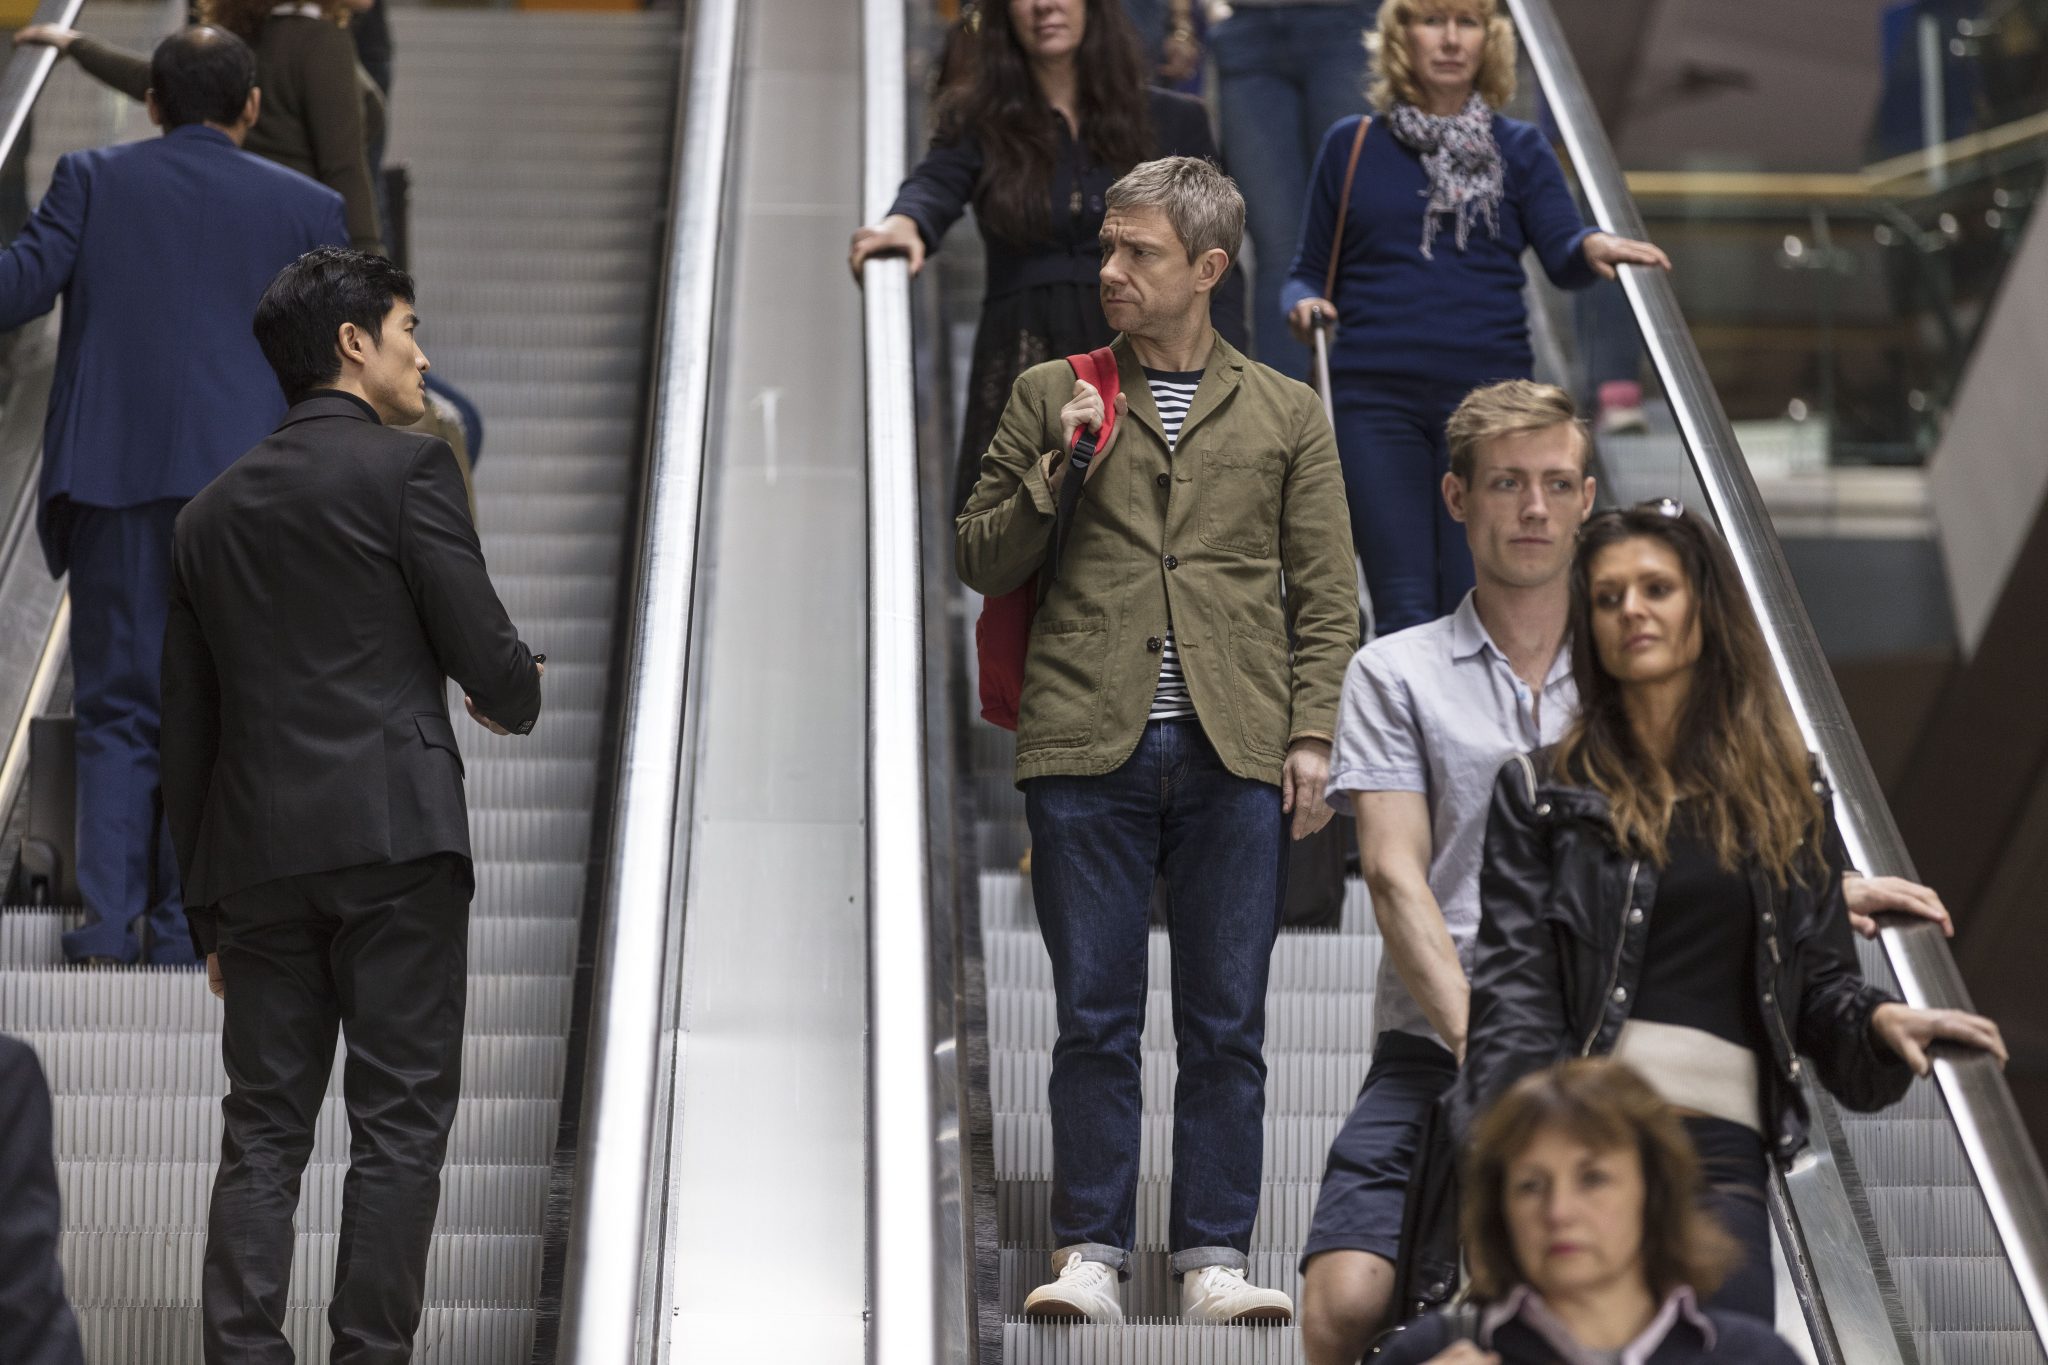 Martin Freeman is spotted by a mysterious stranger while going down an escalator